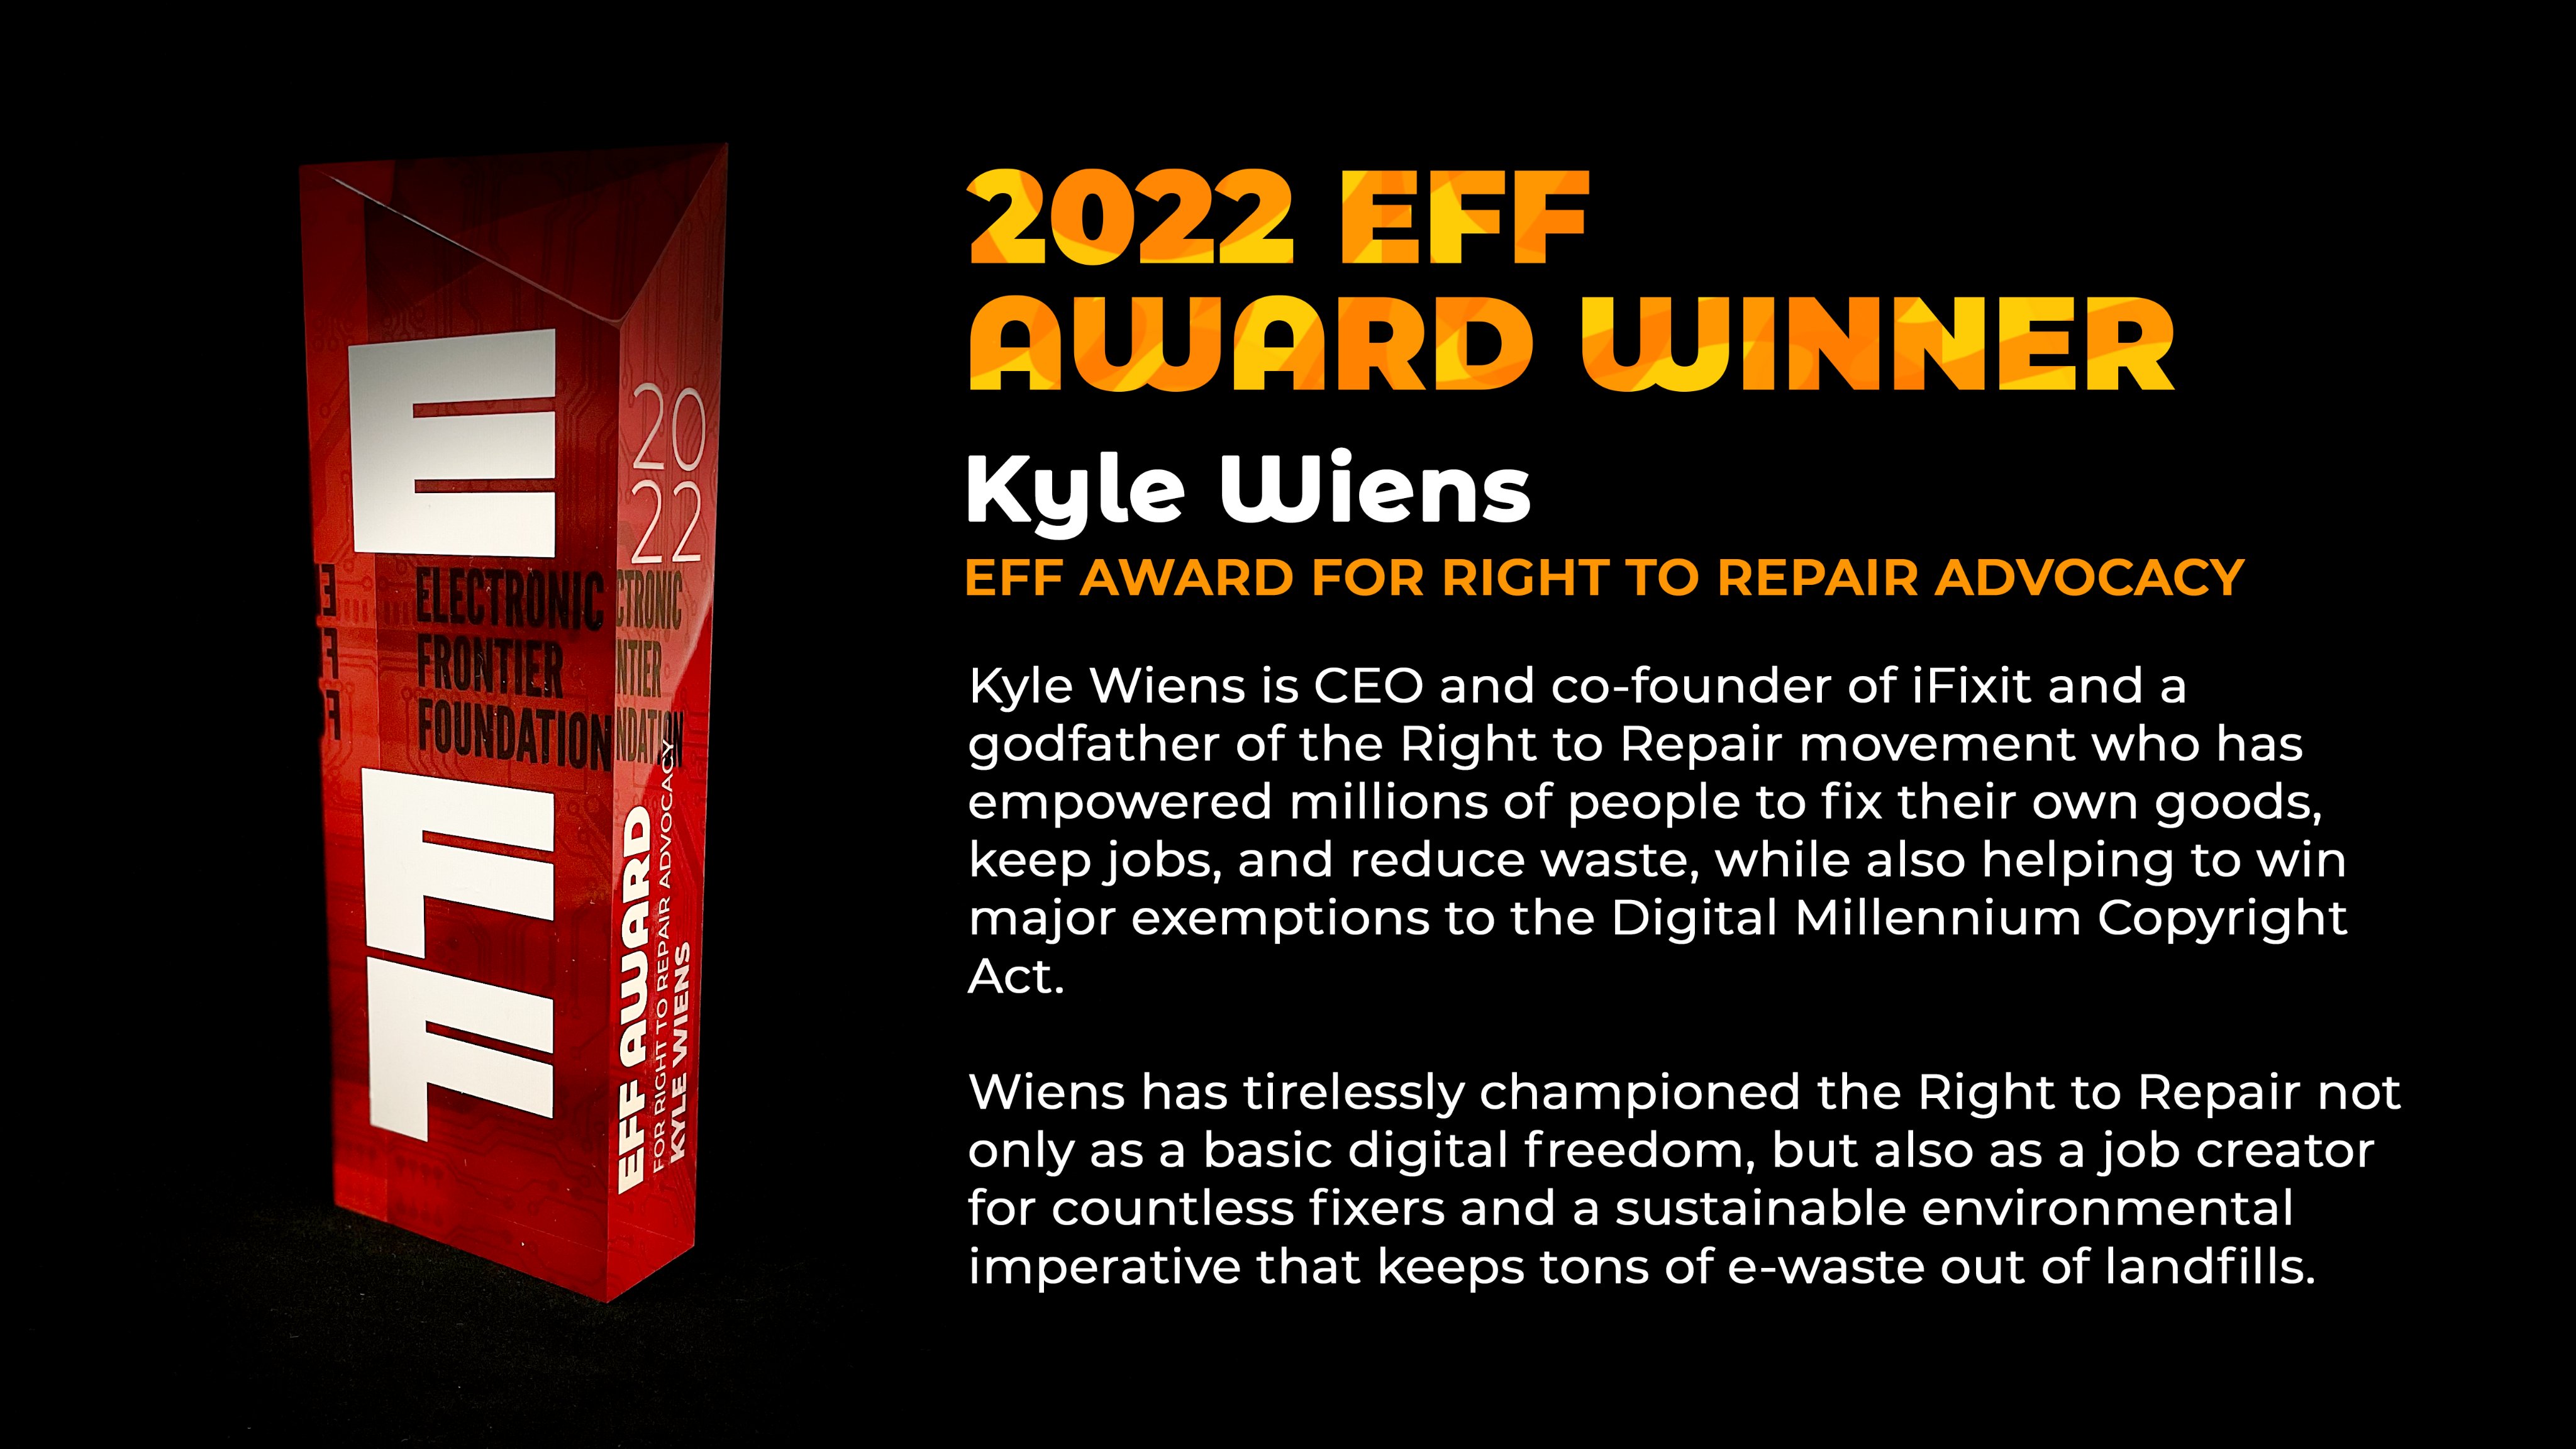 A picture of the EFF award, with the text:  2022 AWARD WINNER Kyle Wiens Kyle FOR RIGHT TO REPAIR ADVOCACY. Kyle Wiens is CEO and co-founder of iFixit and a godfather of the Right to Repair movement who has empowered millions of people to fix their own goods, keep jobs, and reduce waste, while also helping to win major exemptions to the Digital Millennium Copyright Act. Wiens has tirelessly championed the Right to Repair not only as a basic digital freedom, but also as a job creator for countless fixers and a sustainable environmental imperative that keeps tons of e-waste out of landfills.